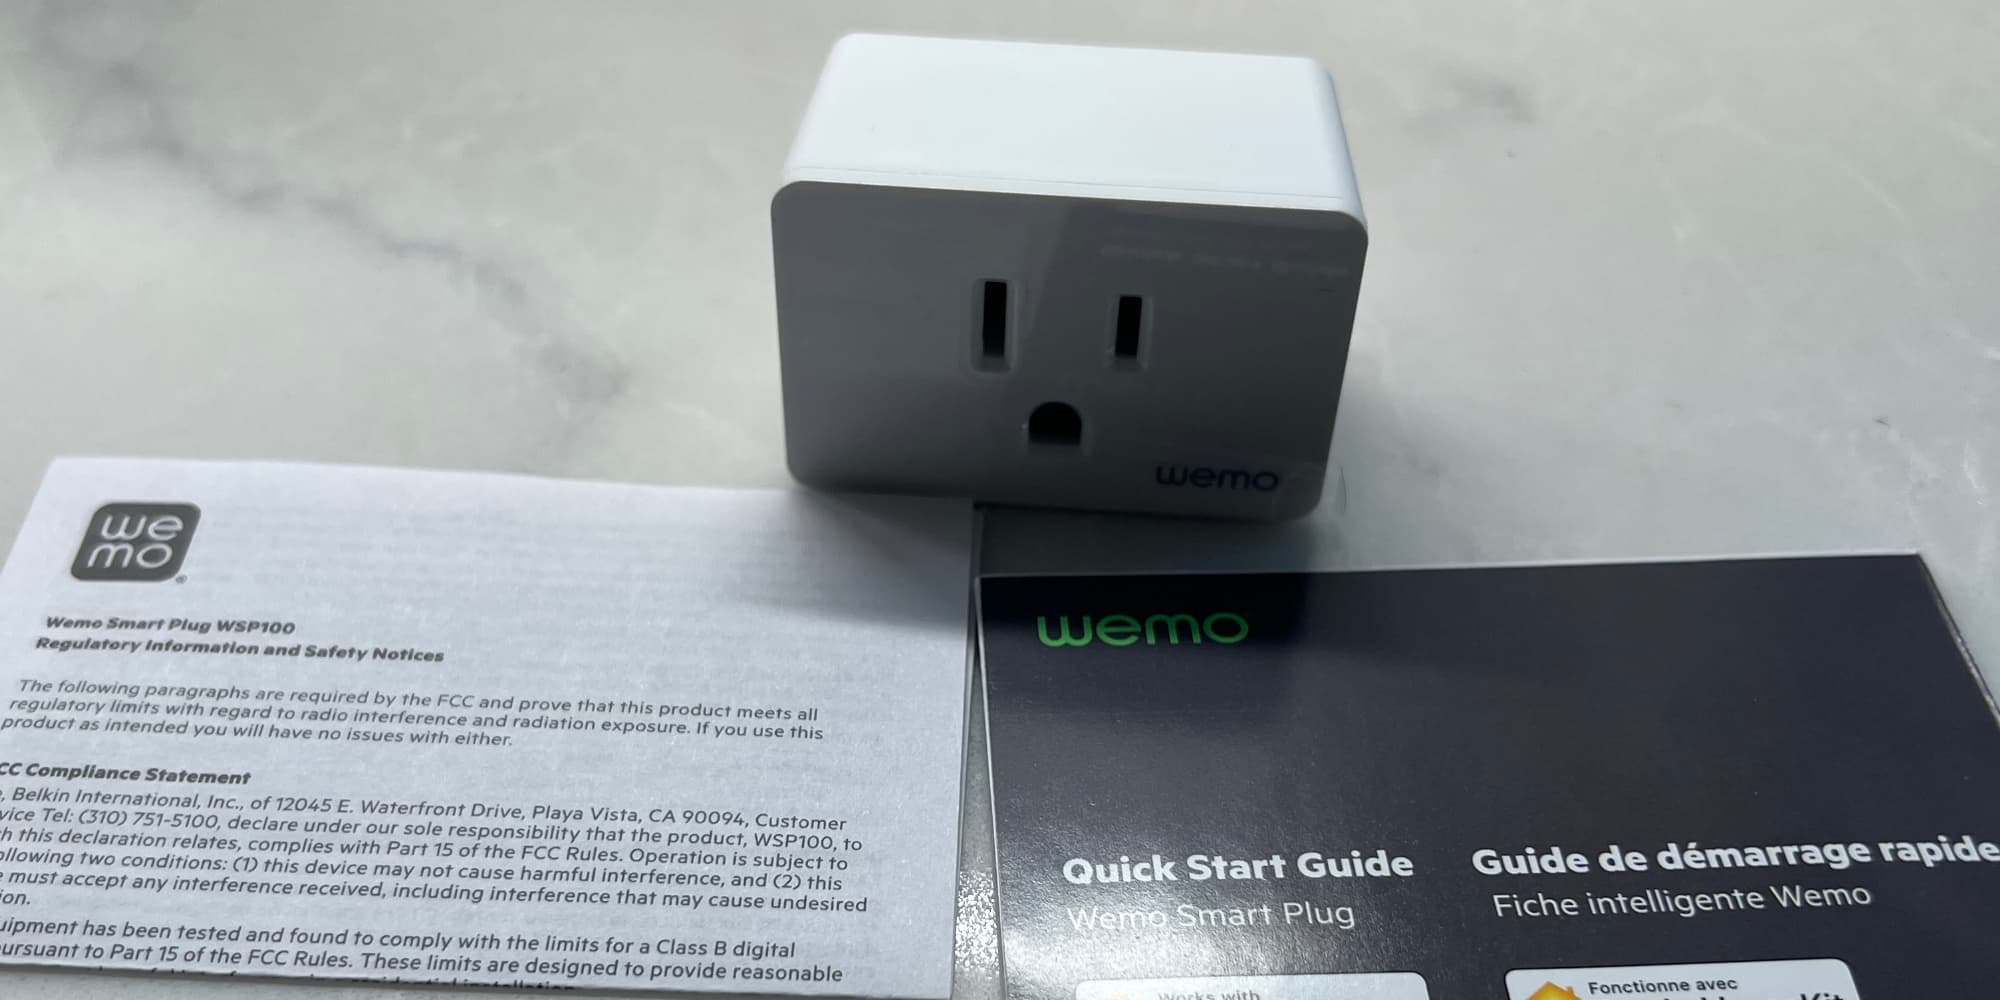 HomeKit Weekly: Wemo Smart Plug with Thread might be the best value for smart outlet adaptors